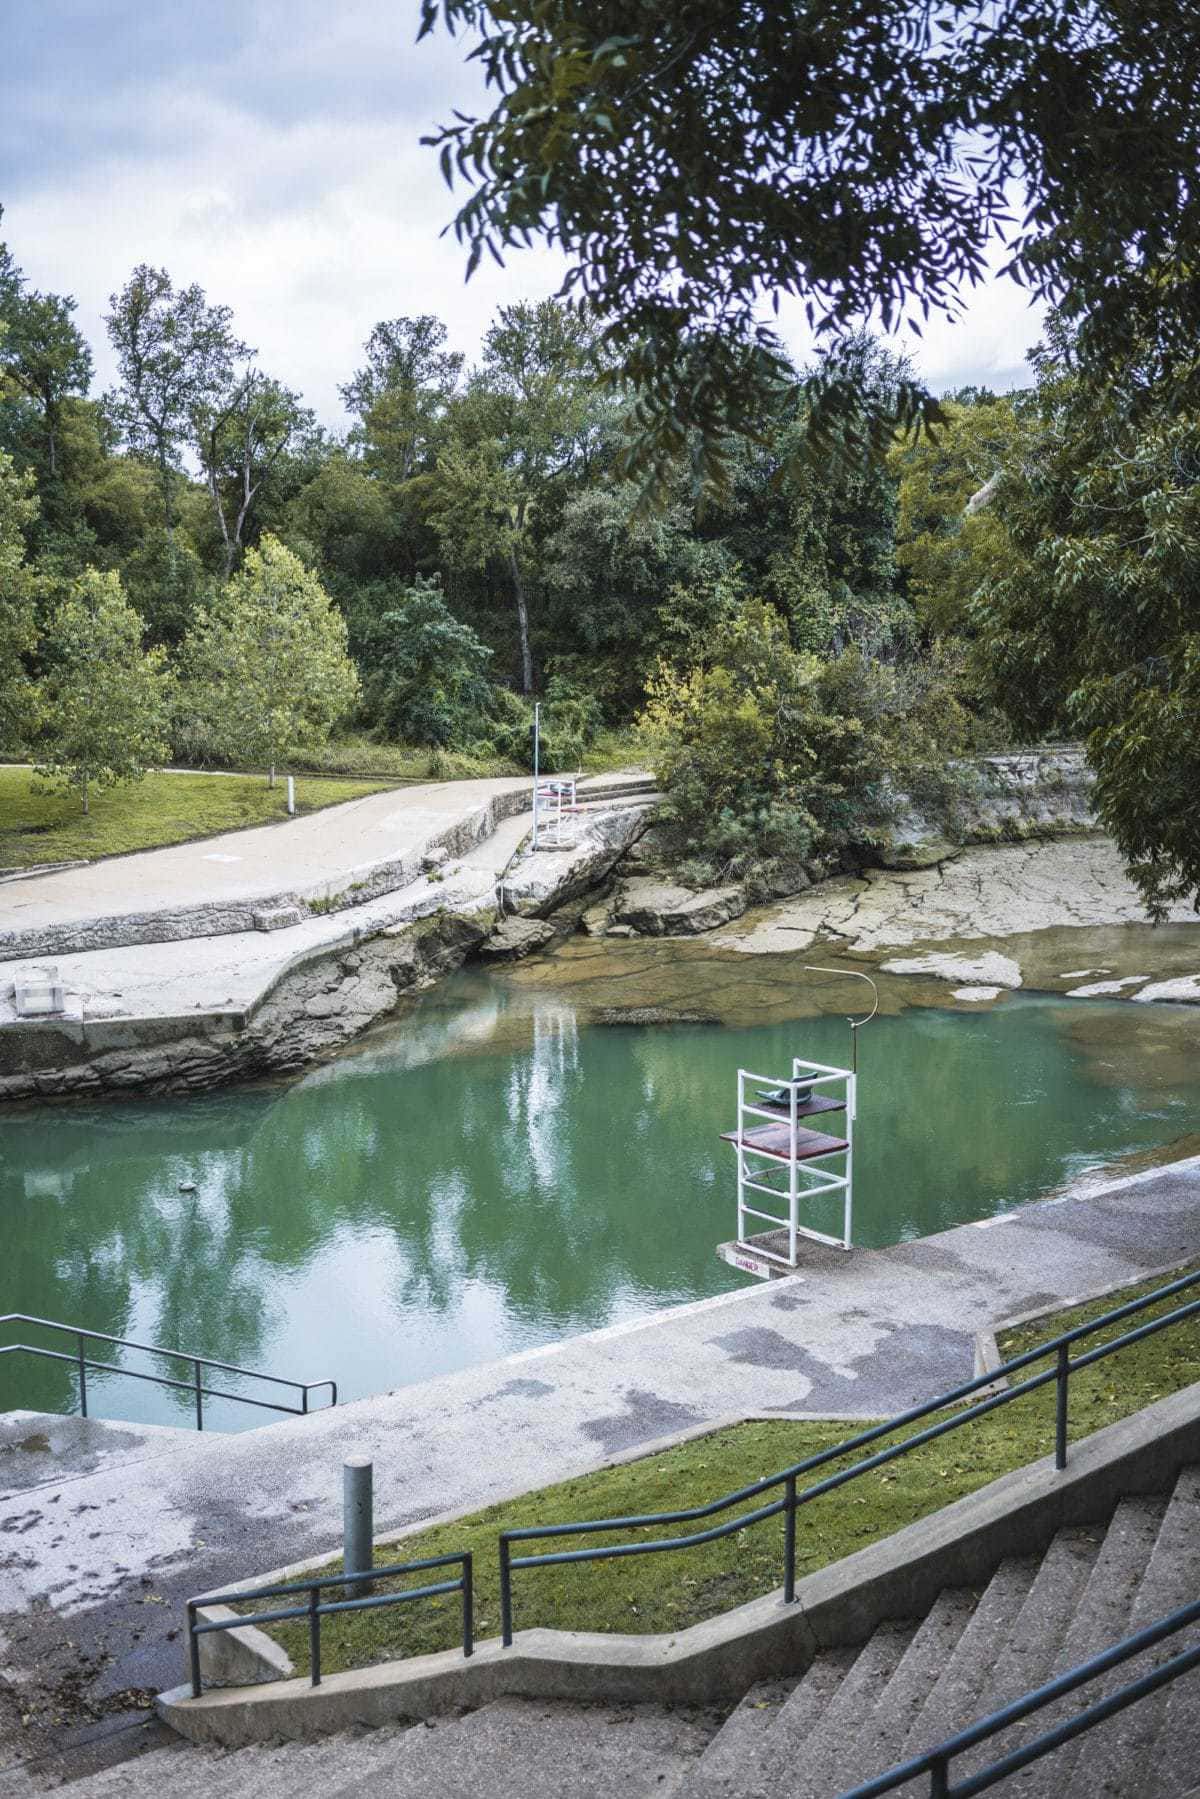 How to Spend the Ultimate Long Weekend in Austin (12 Awesome Ideas)